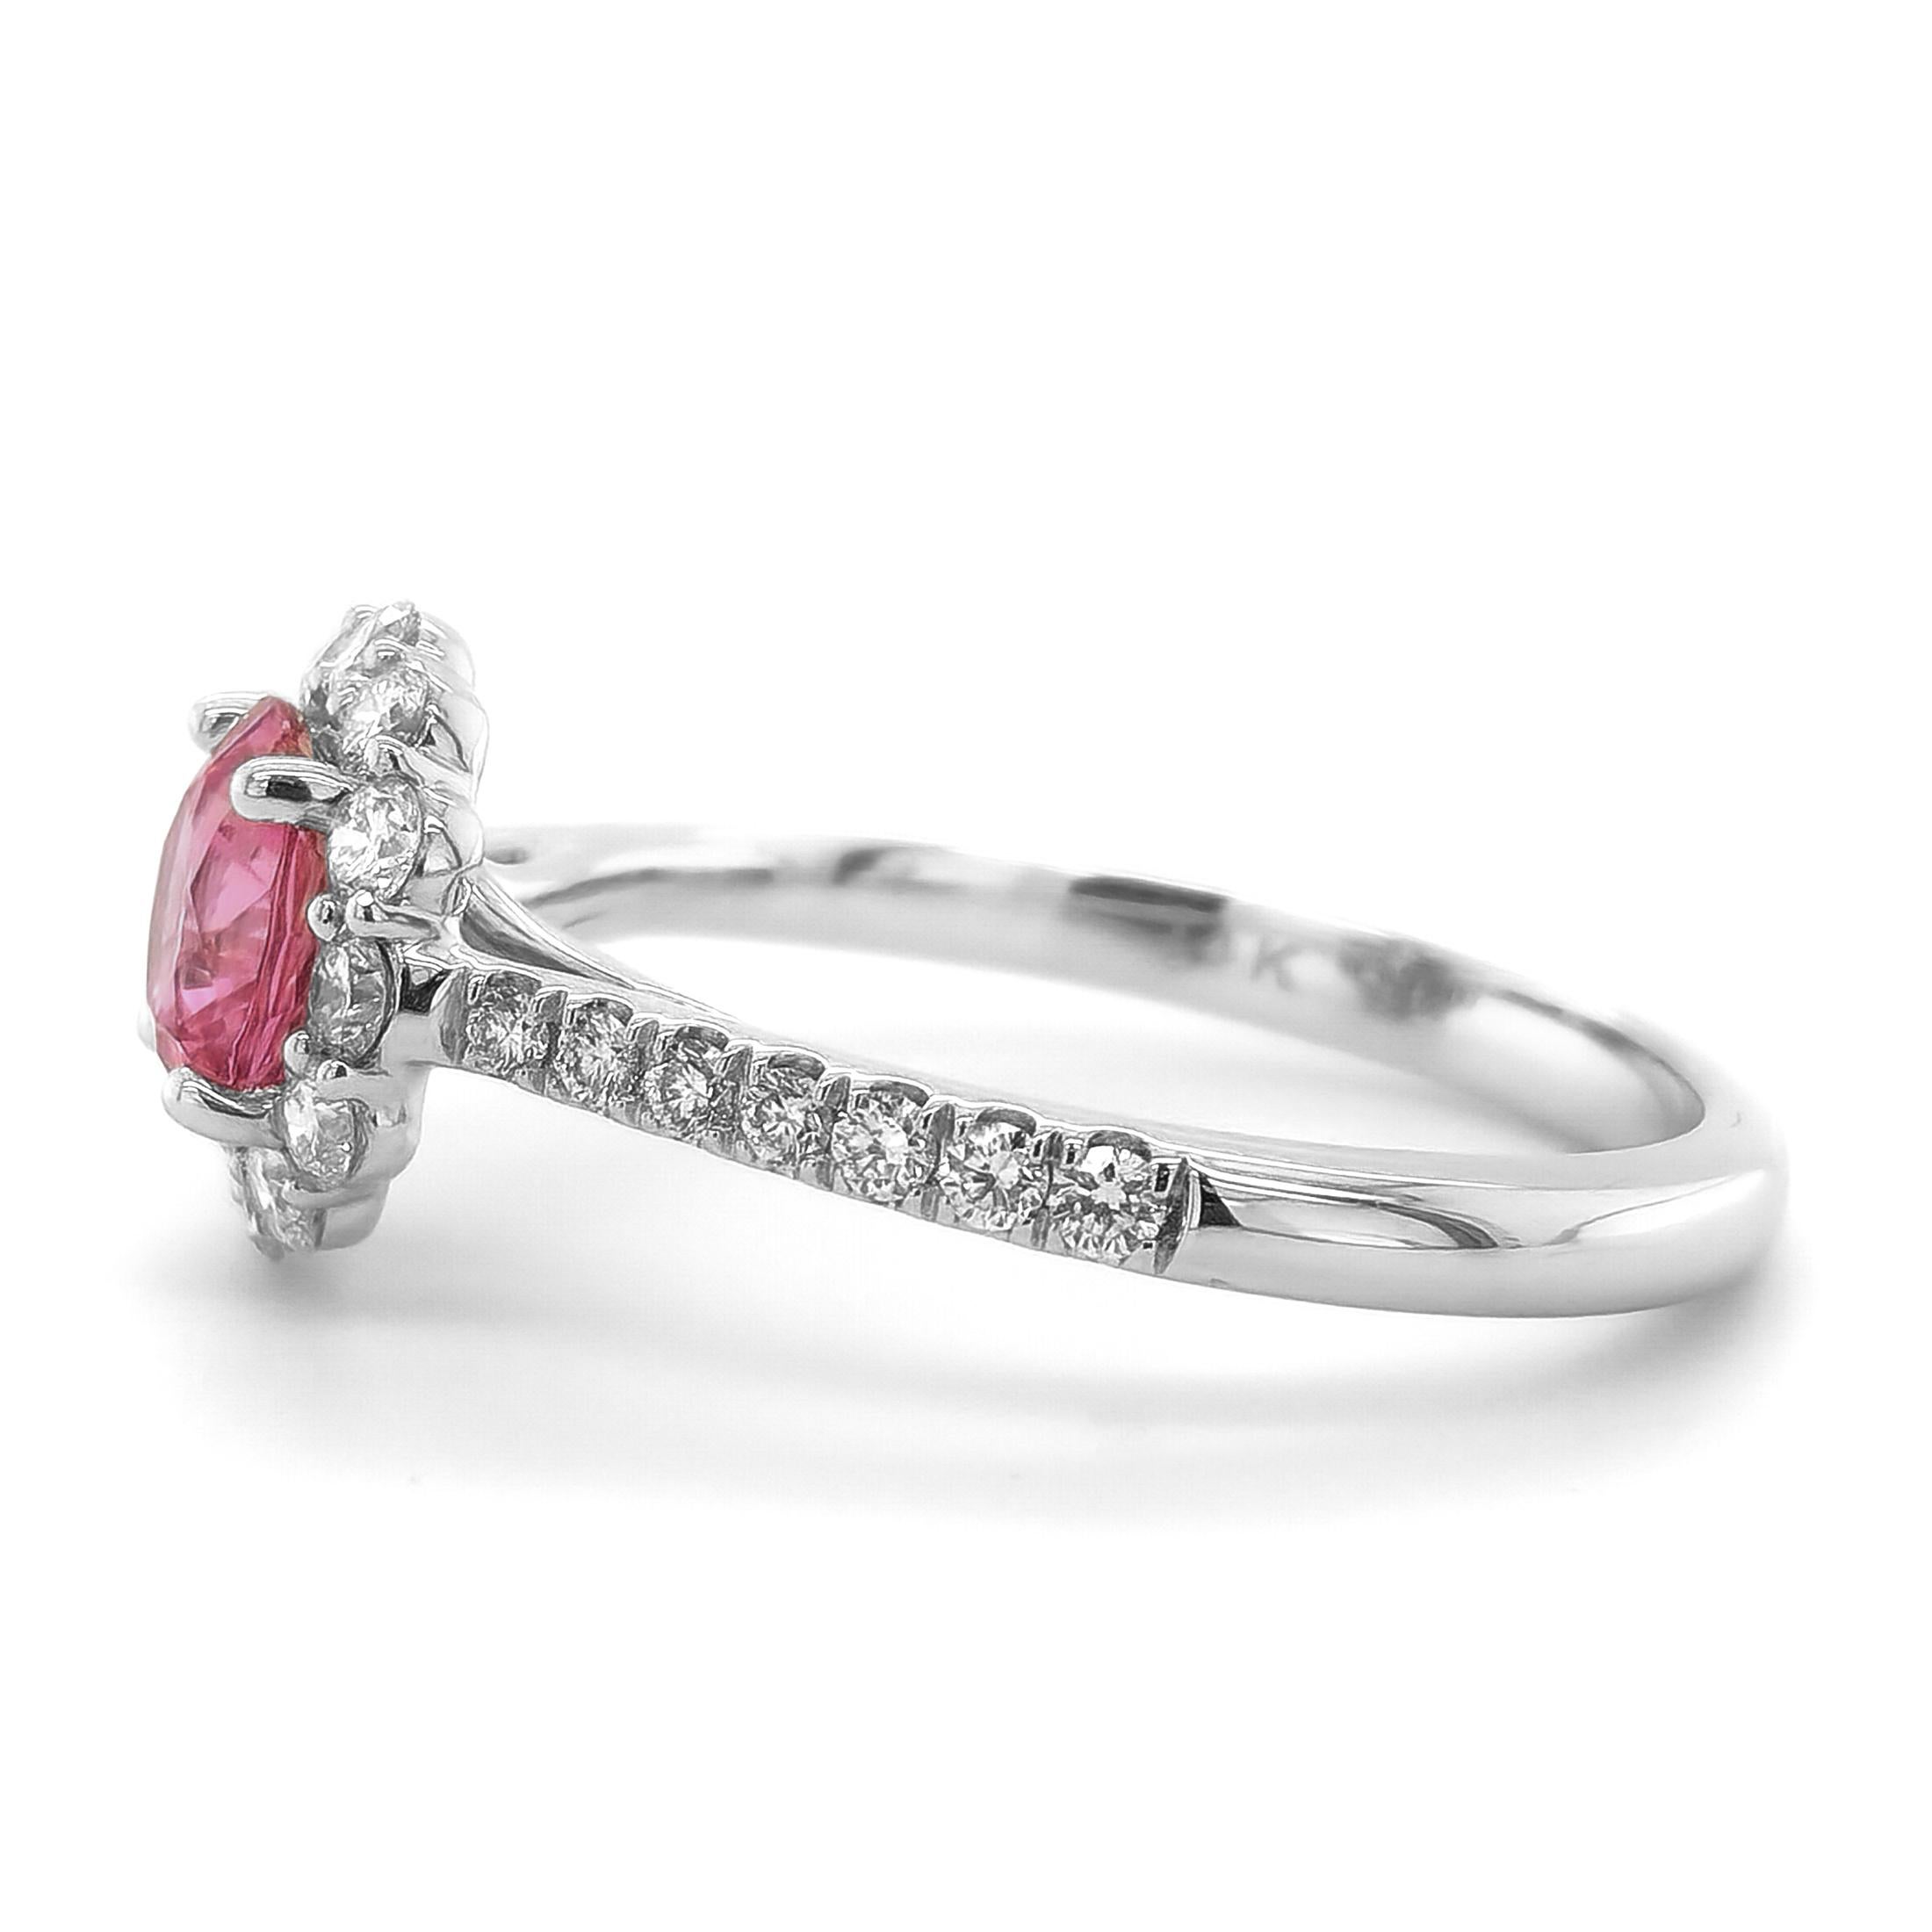 Certified 1.11 Carat Padparadscha Sapphire Diamond set in 14K White Gold Ring In New Condition For Sale In Los Angeles, CA